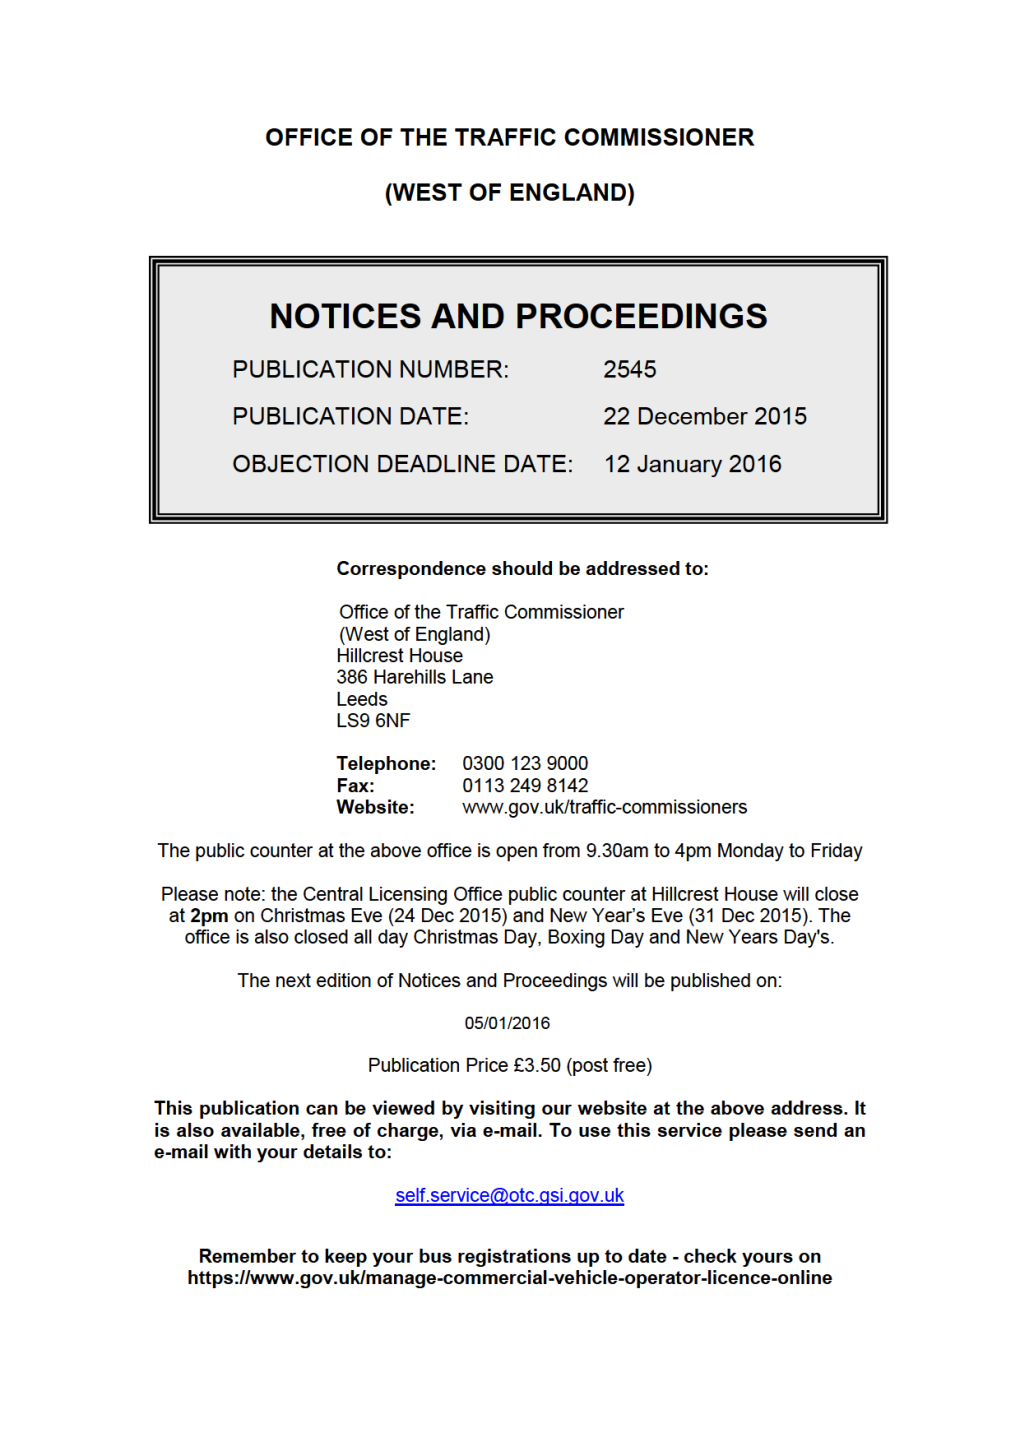 NOTICES and PROCEEDINGS 22 December 2015